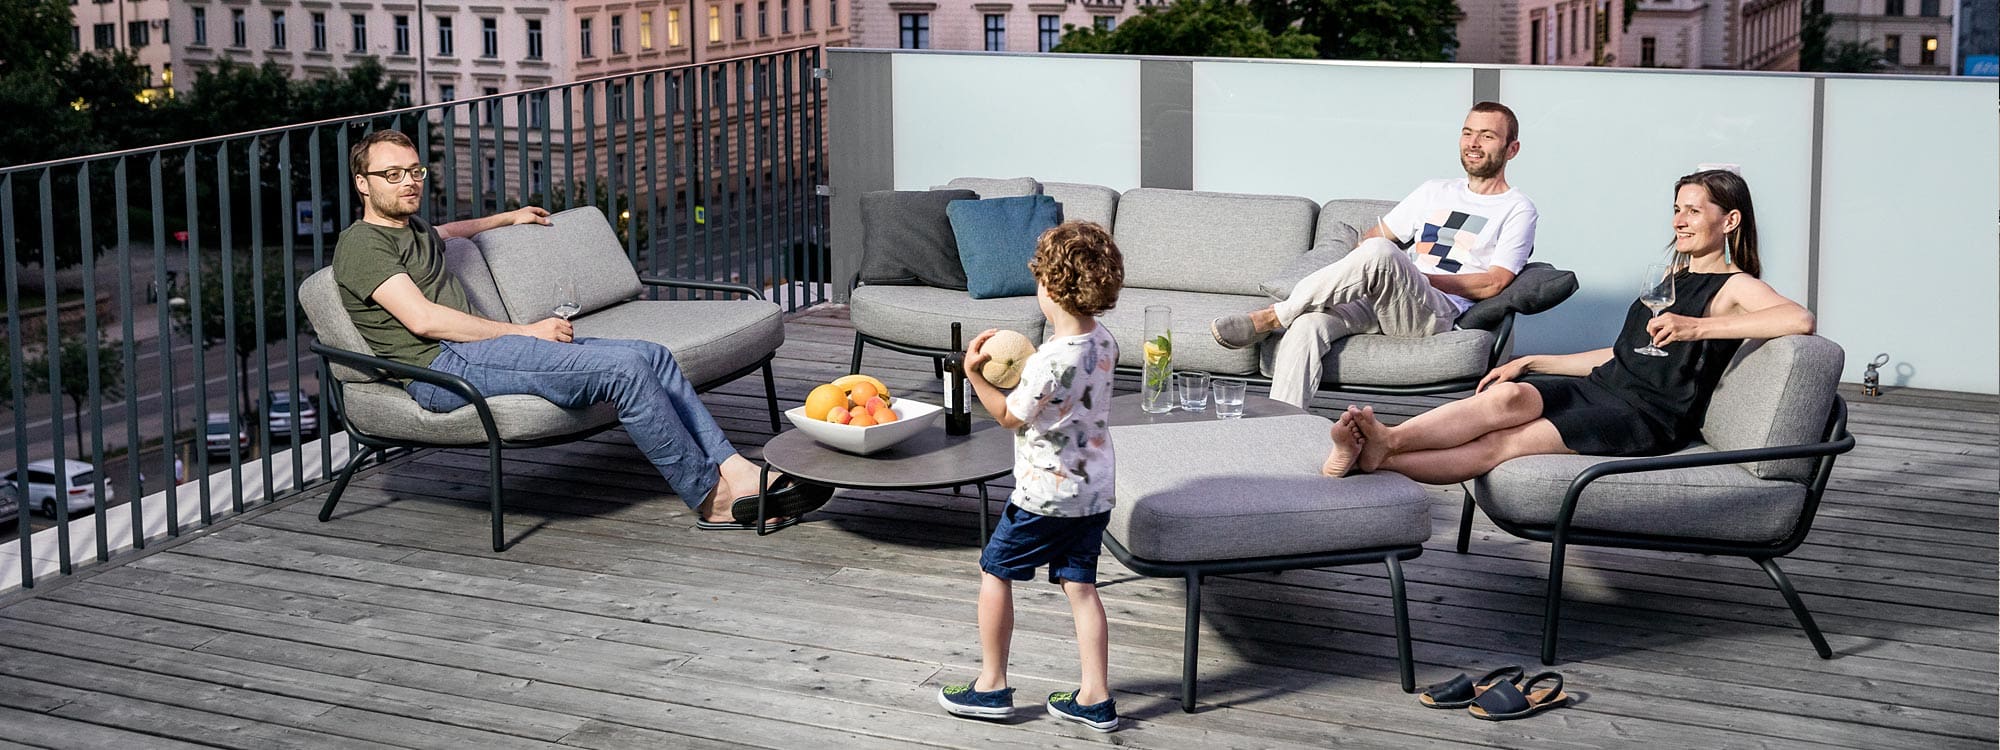 Image of 3 adults and a child relaxing on Todus Starling modern garden sofas on city rooftop terrace